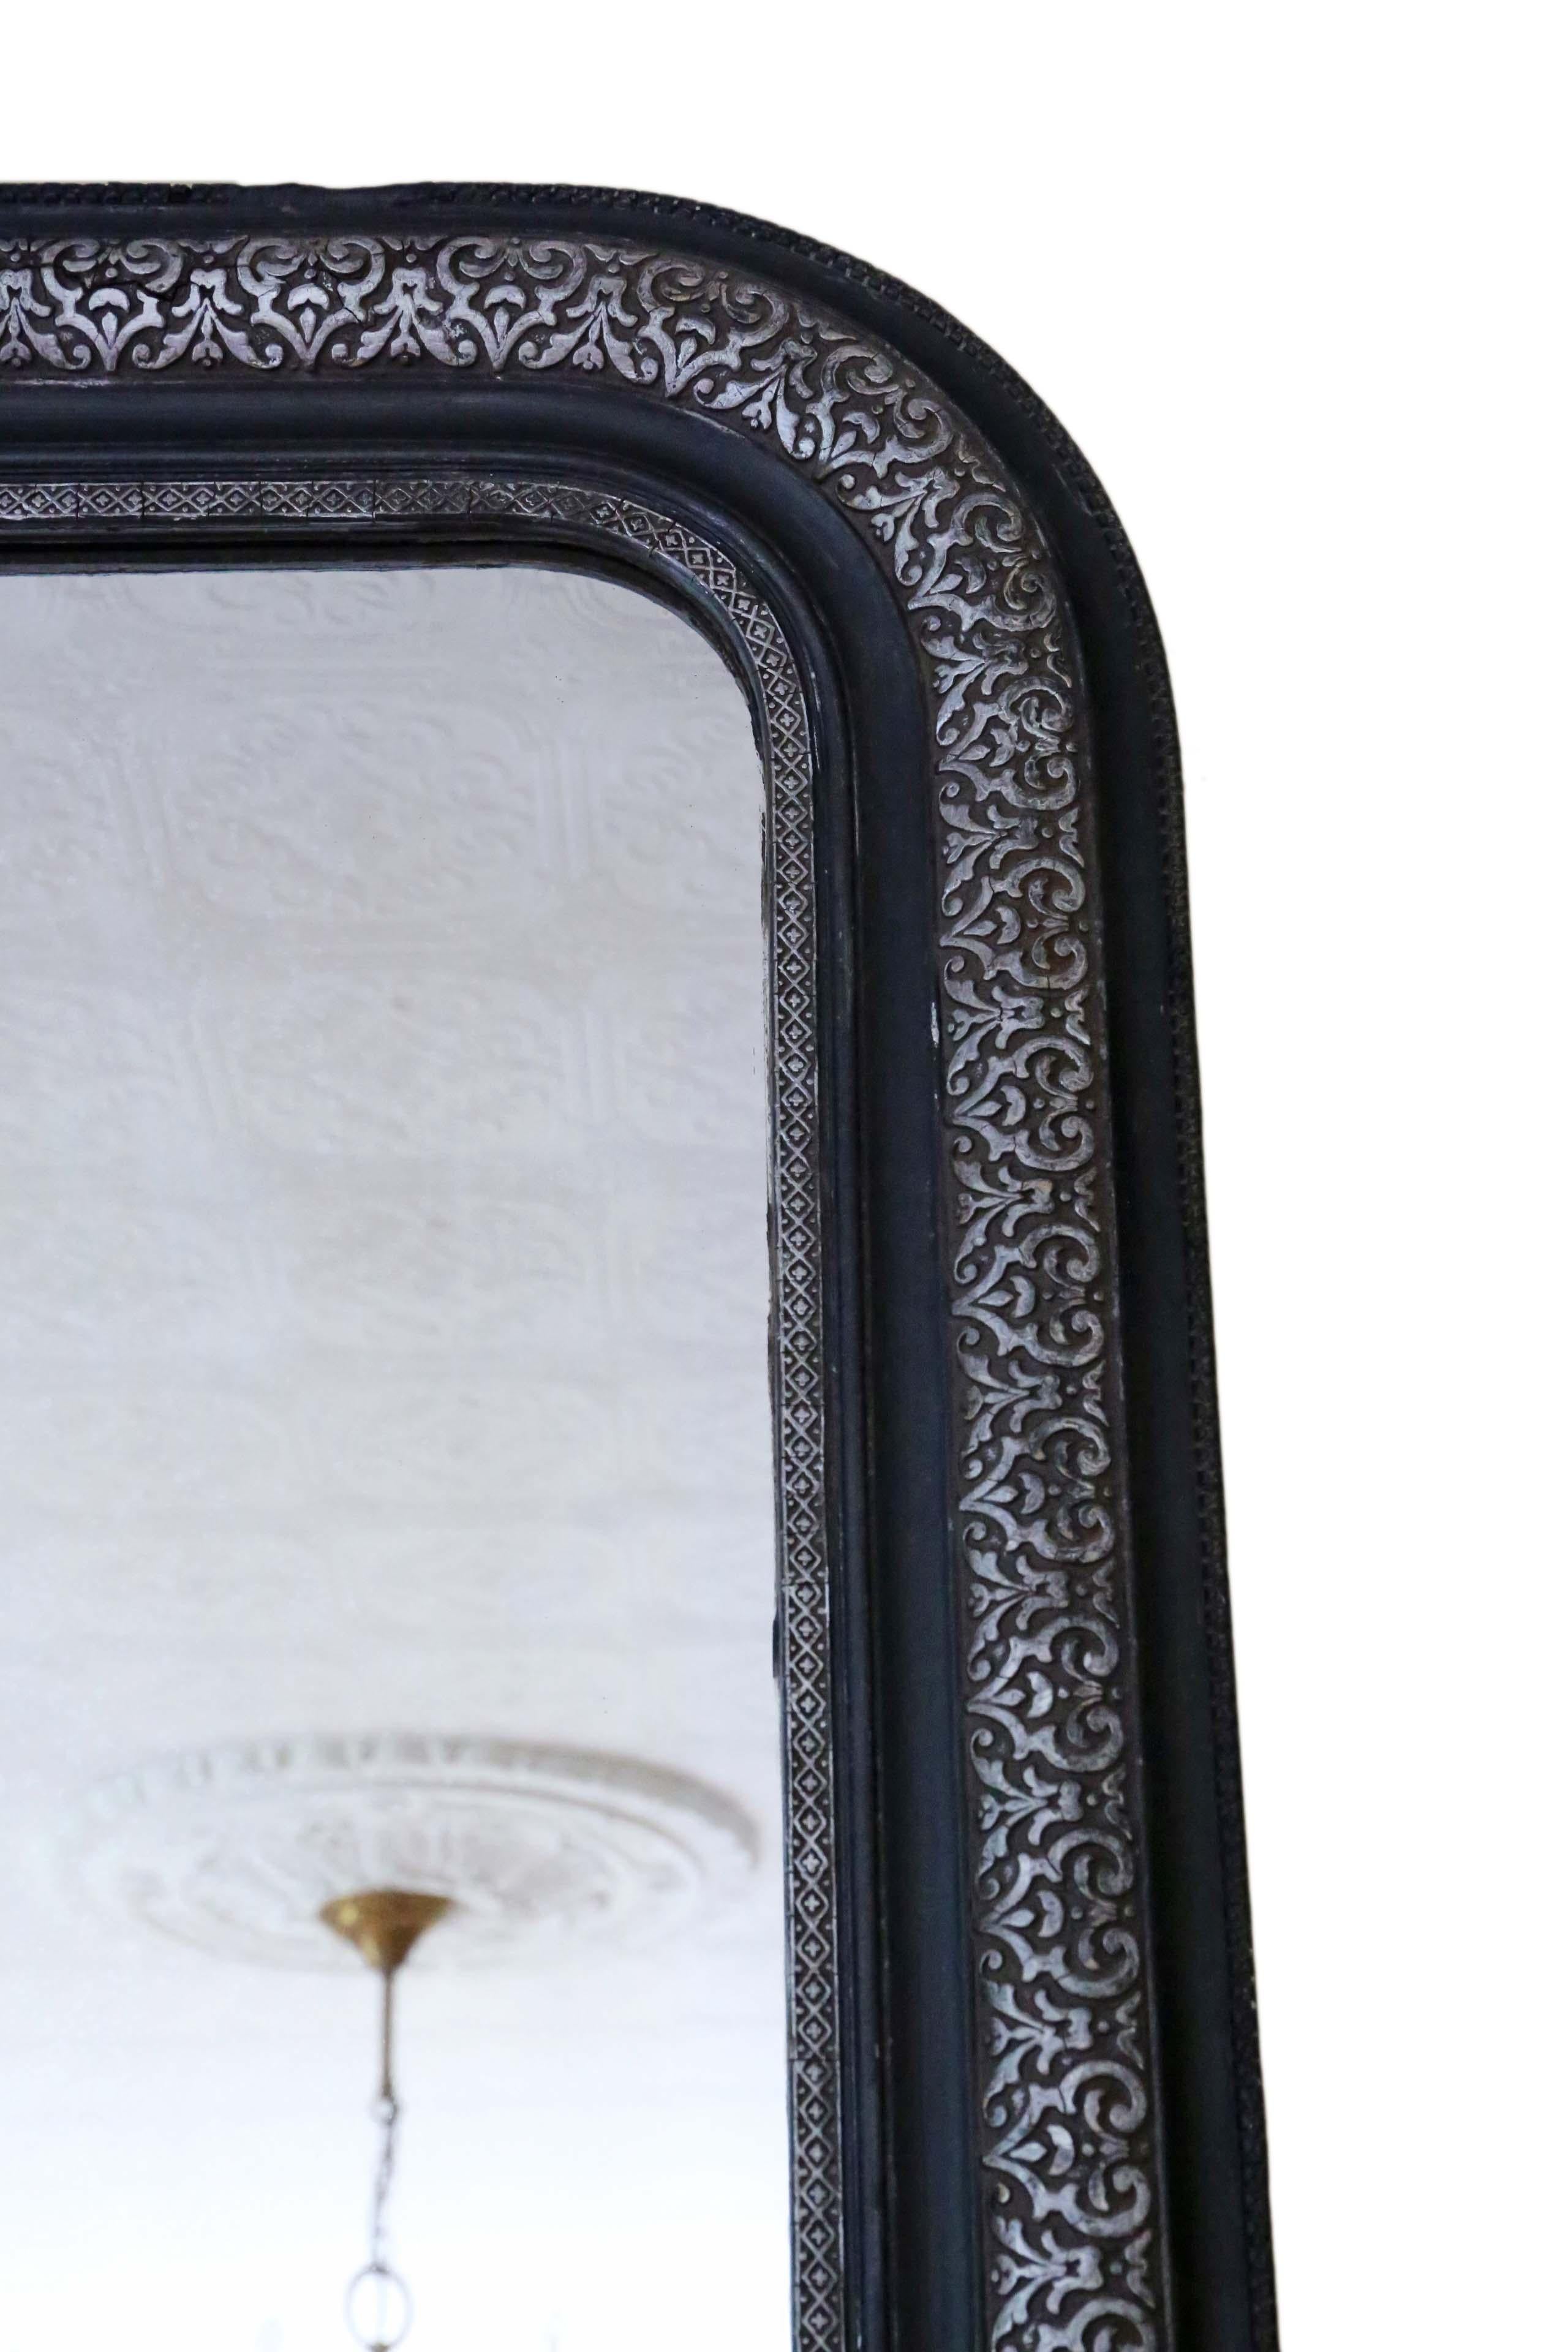 Antique Large Ebonised Silver Gilt Wall Mirror Overmantle Late 19th Century In Good Condition For Sale In Wisbech, Cambridgeshire